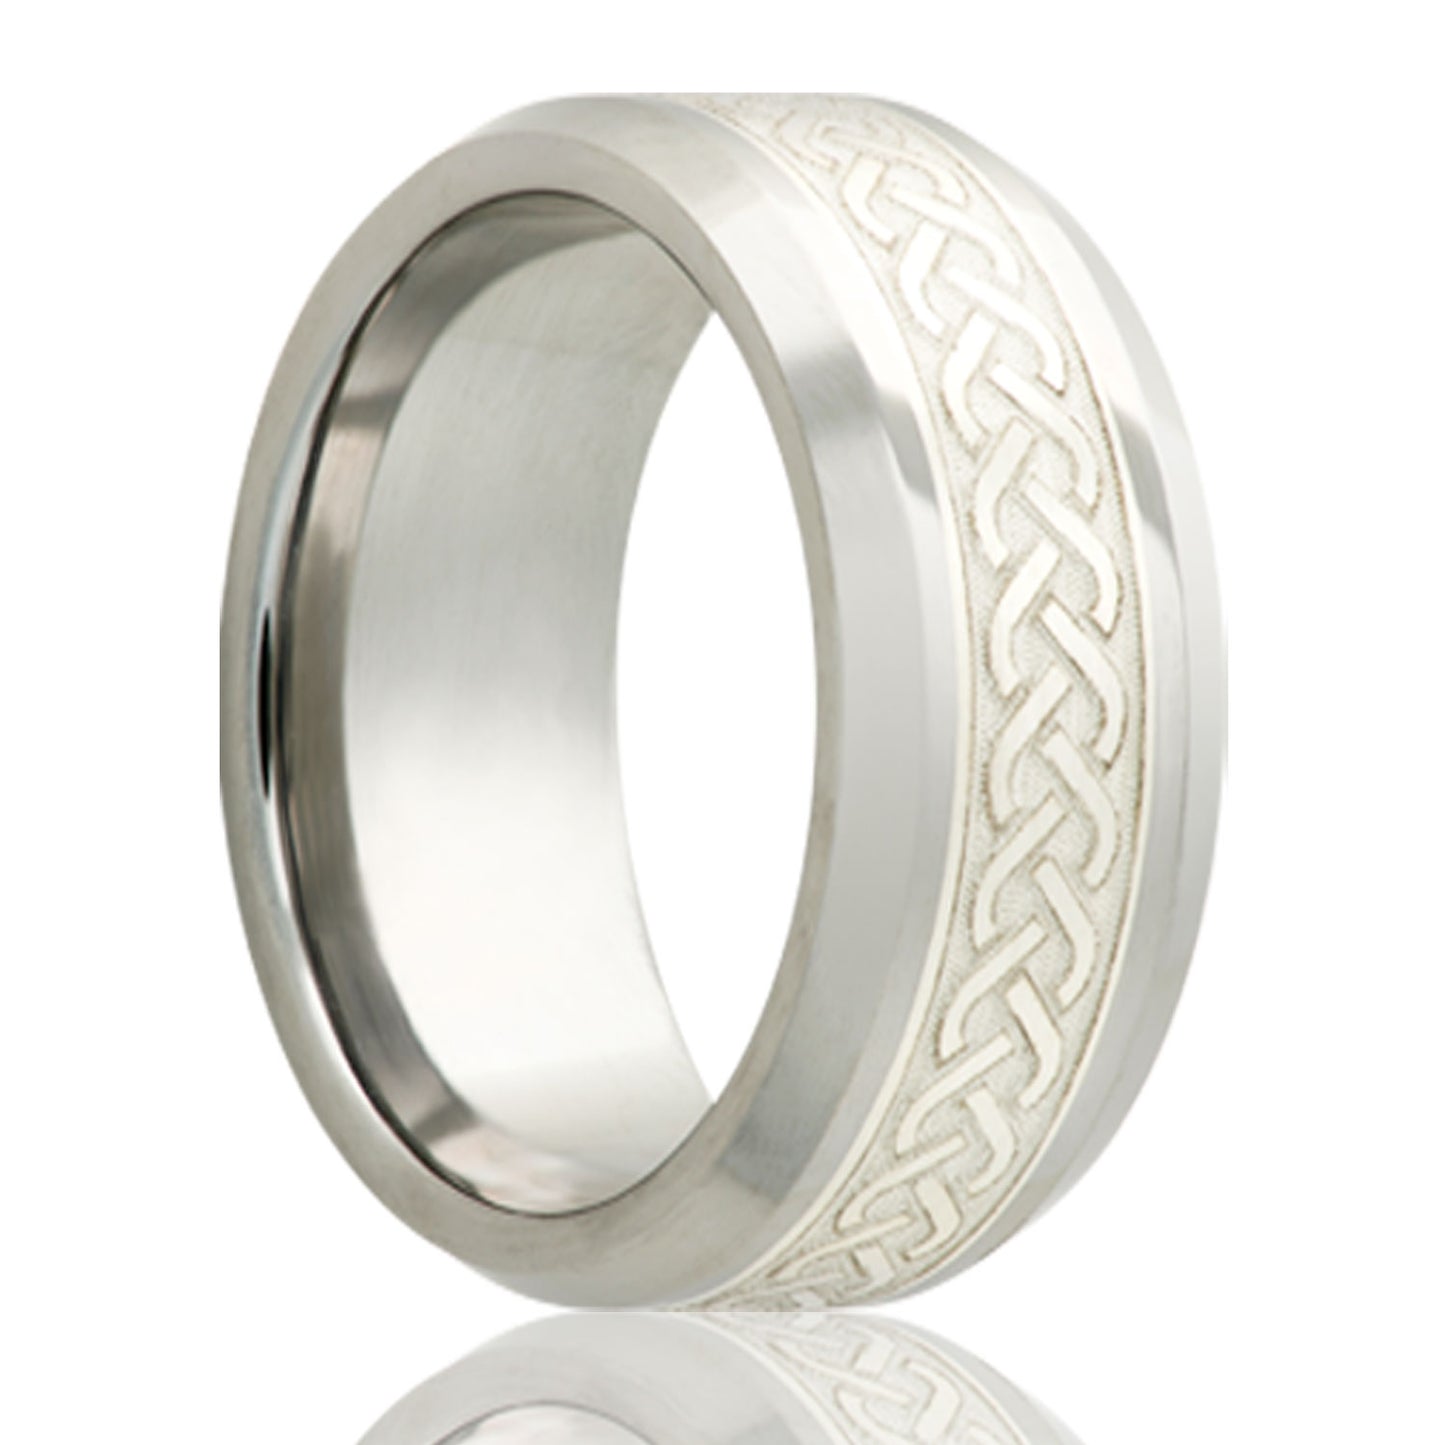 A celtic knot silver inlay cobalt men's wedding band with beveled edges displayed on a neutral white background.